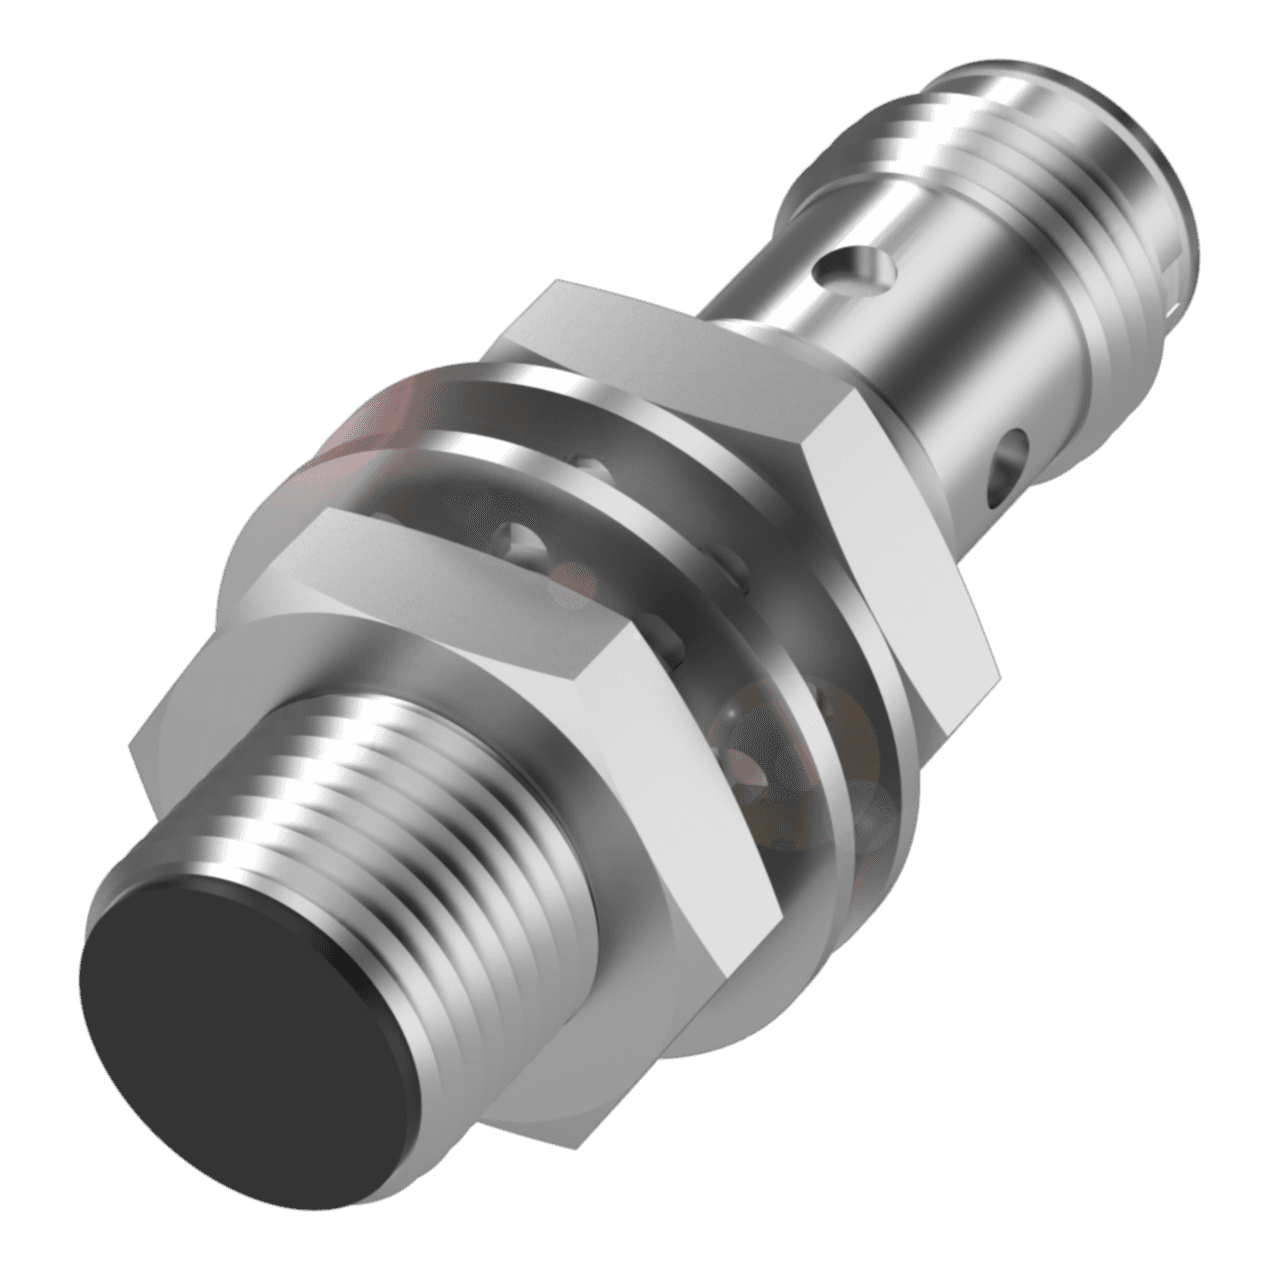 Balluff BES00EC Inductive standard sensors with preferred type, Dimension: Ø 12 x 45 mm, Style: M12x1, Installation: for flush mounting, Range: 4 mm, Switching output: PNP Normally closed (NC), Switching frequency: 2500 Hz, Housing material: Brass, Nickel-free coated